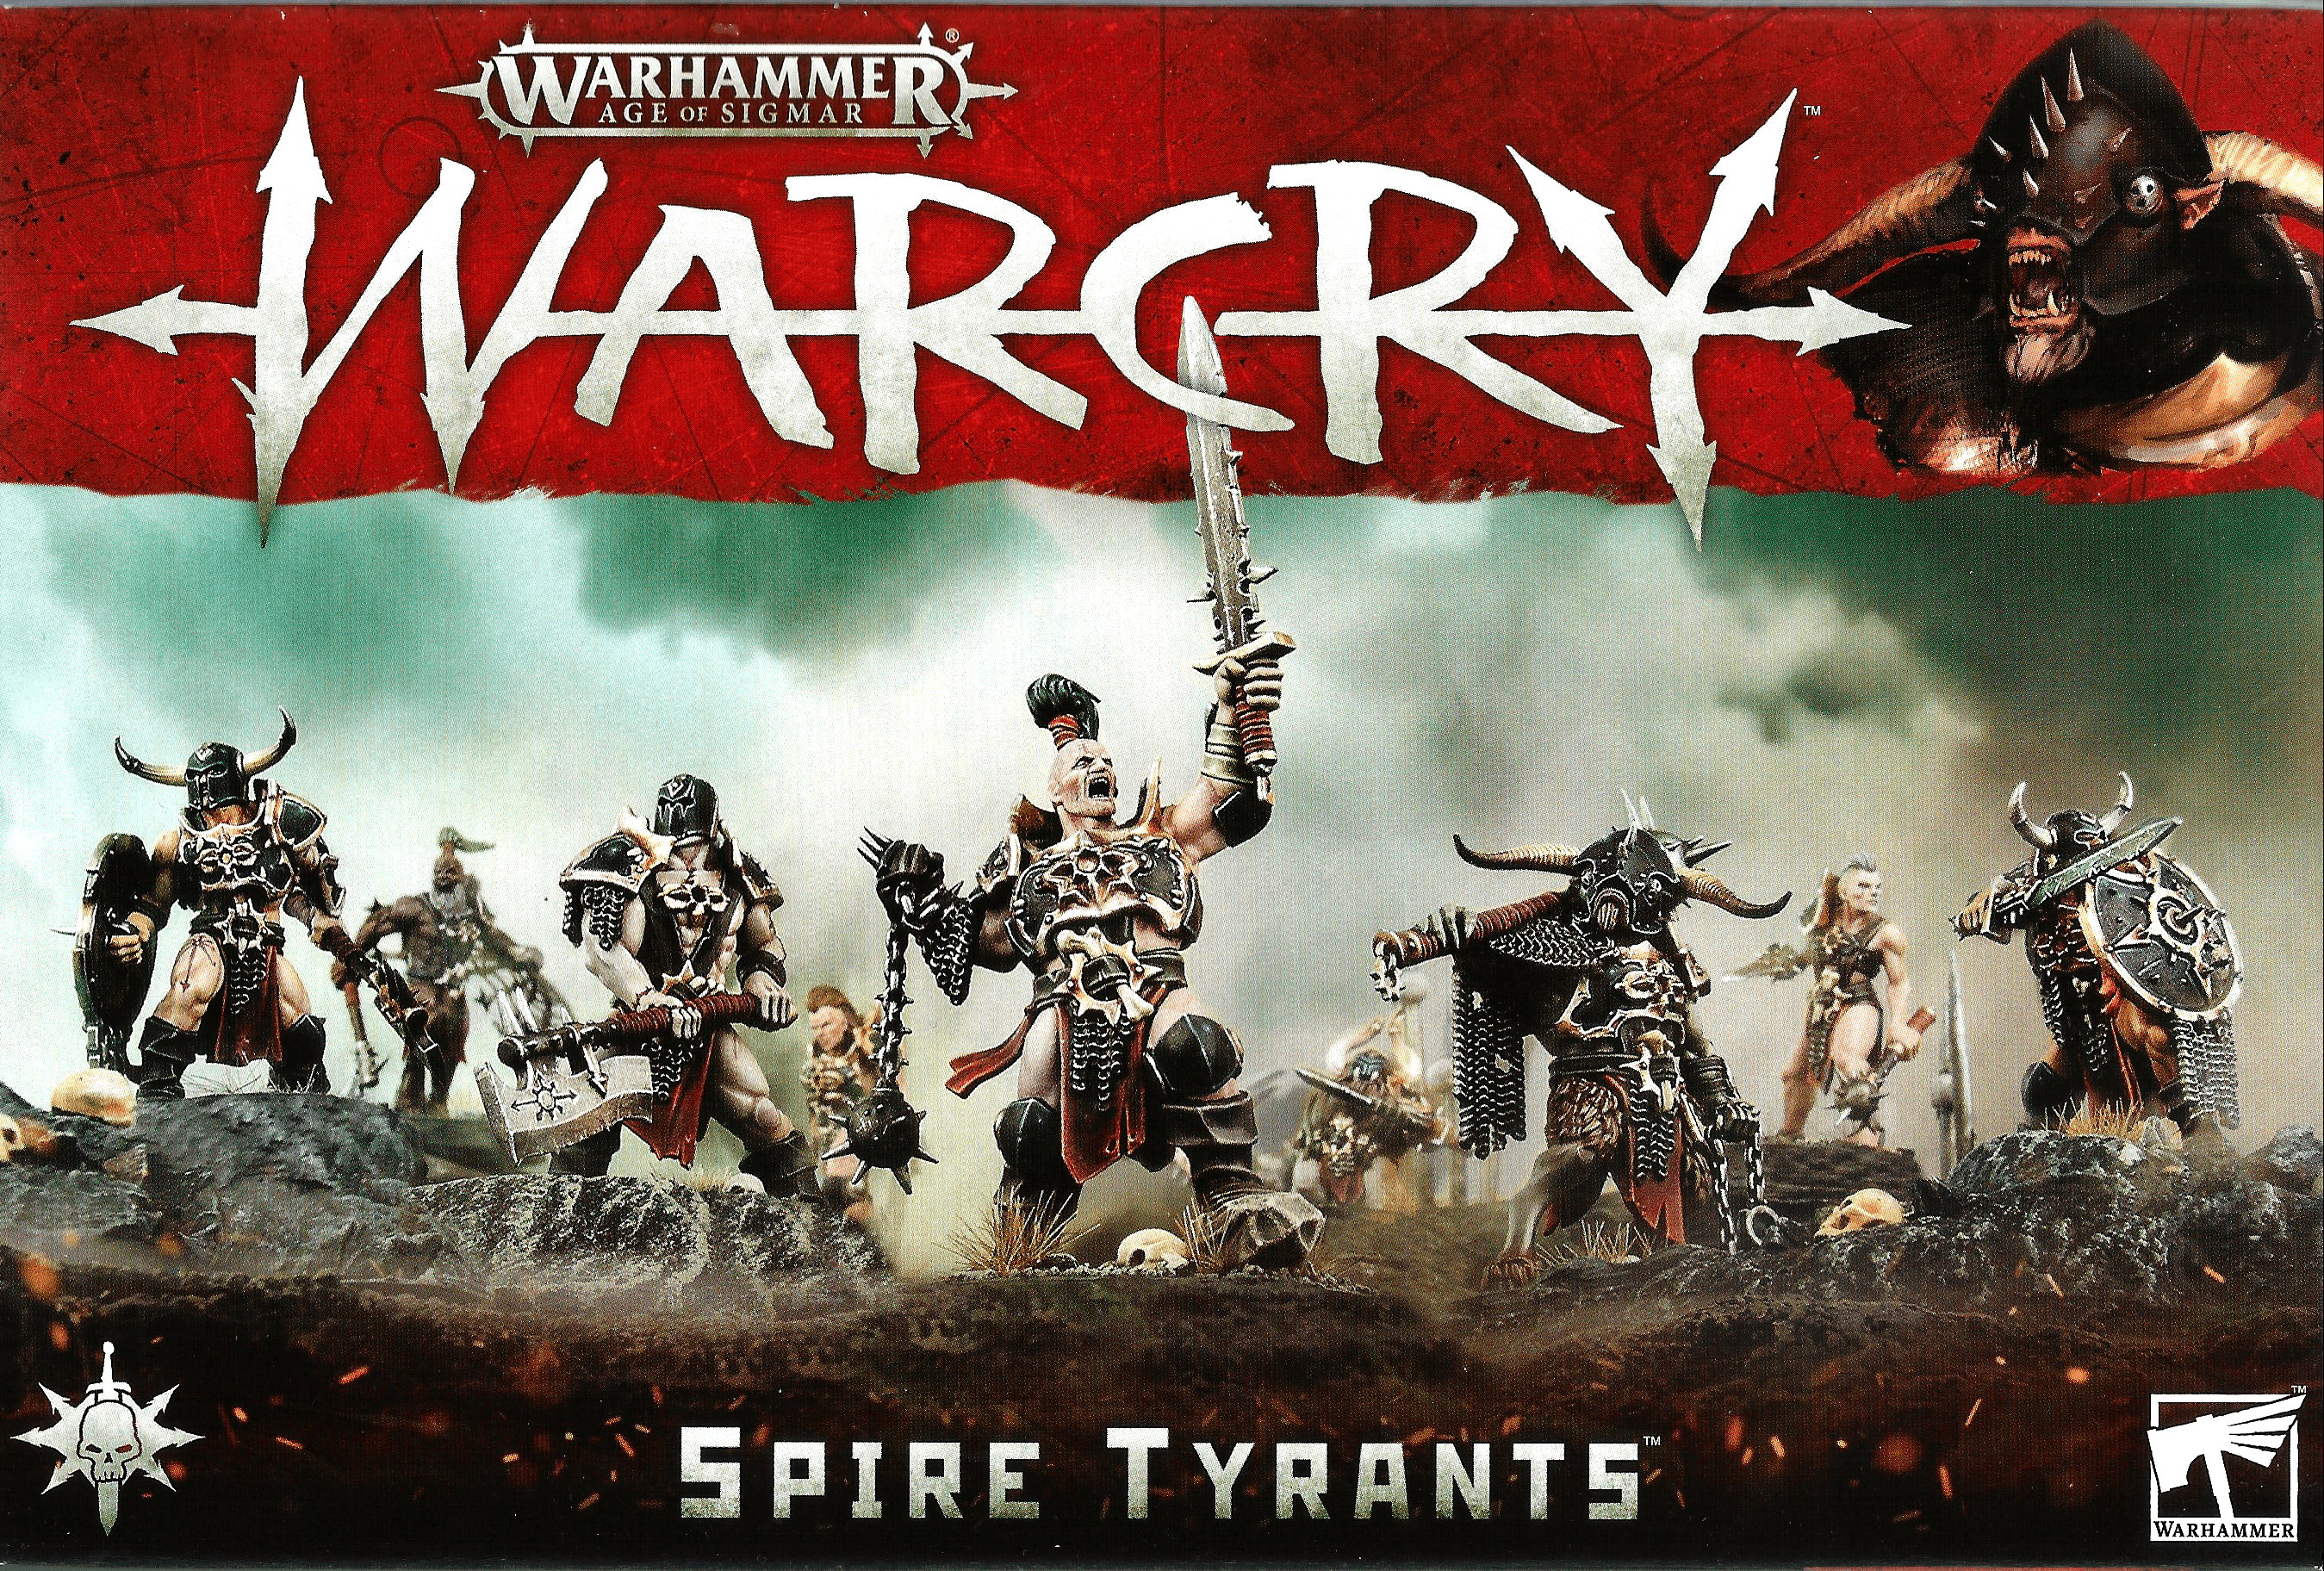 Warhammer Age of Sigmar: Warcry – Spire Tyrants